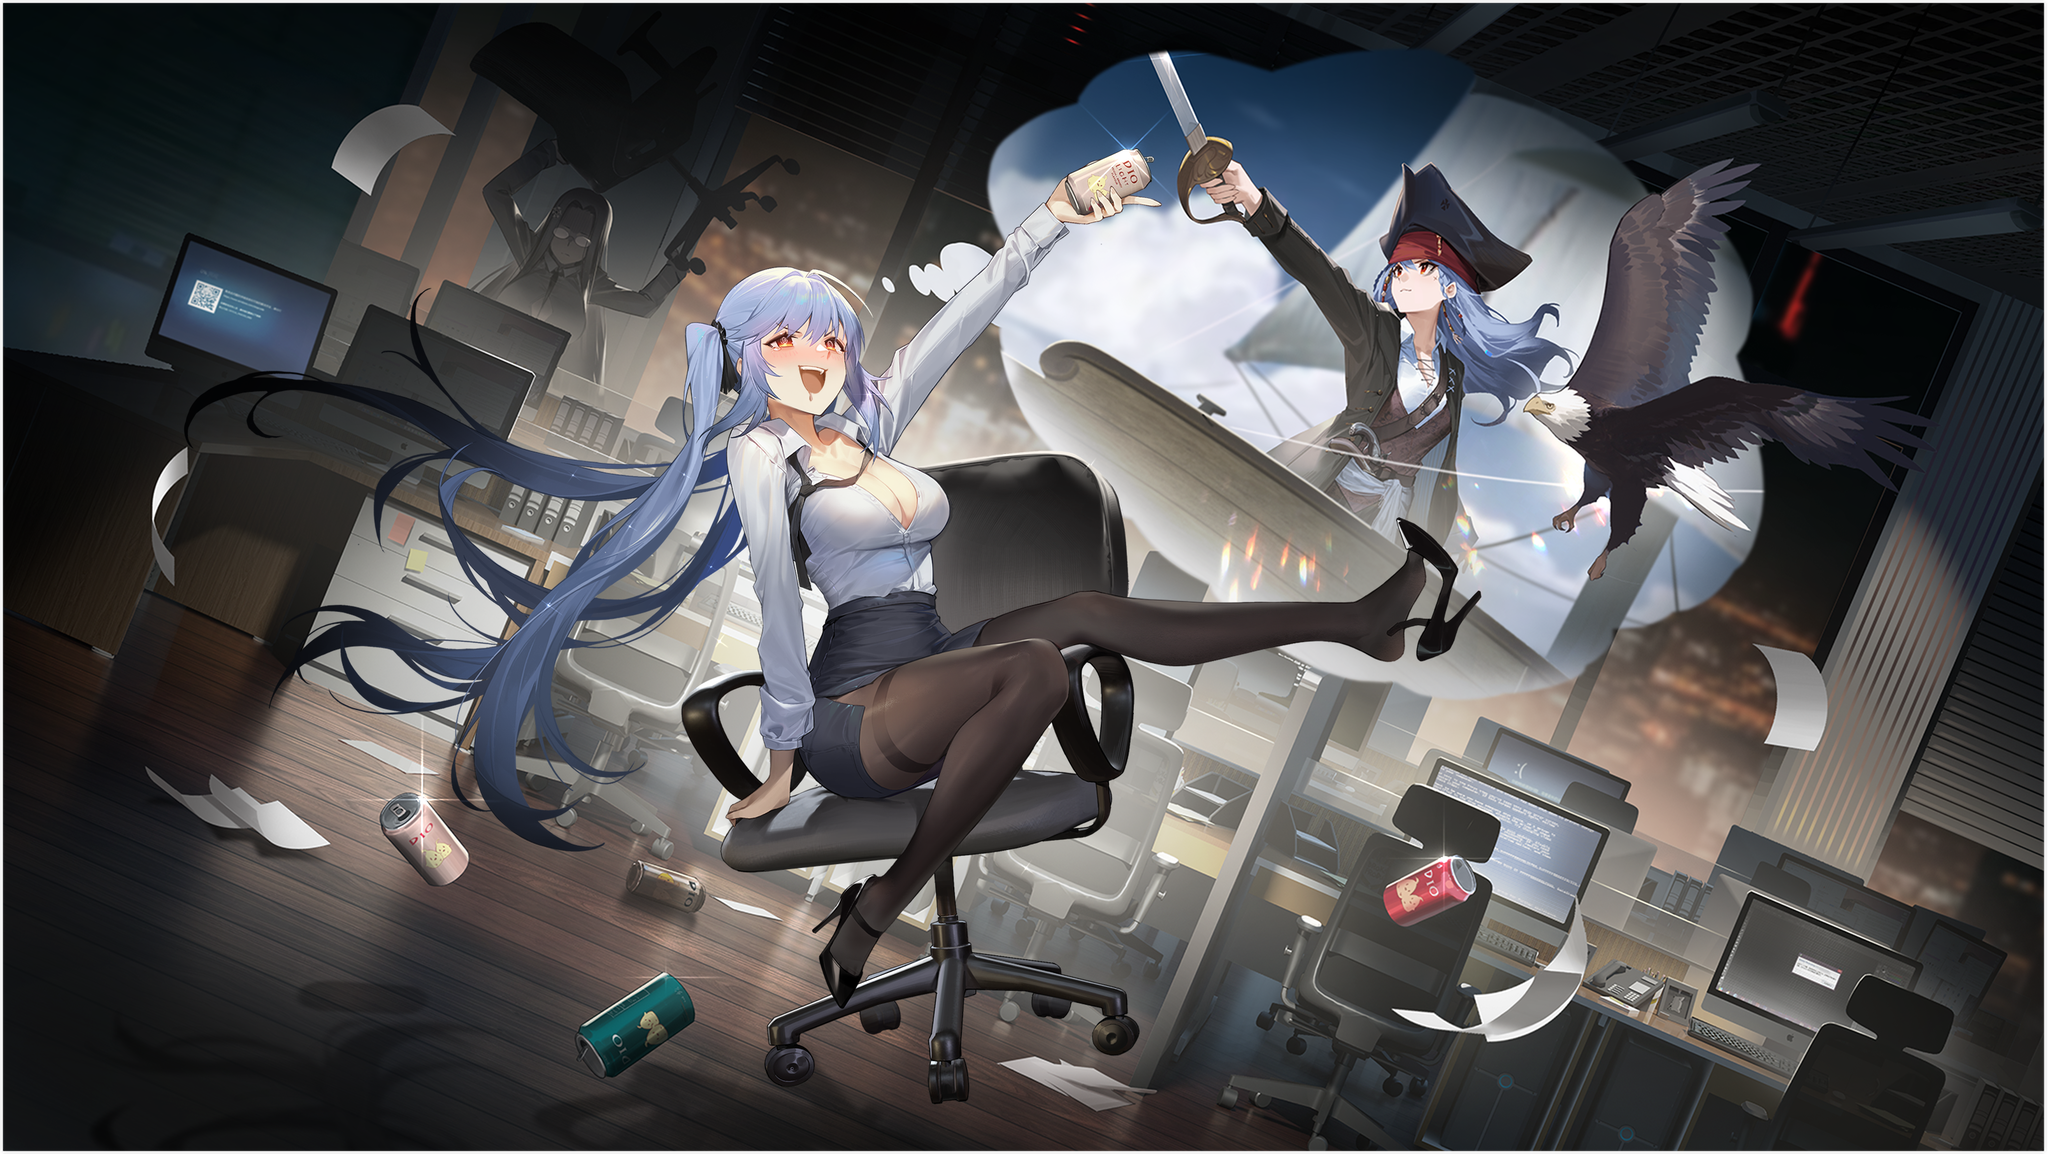 Anime 2048x1154 anime girls Azur Lane drunk office girl can computer beer alcohol falling pantyhose cleavage big boobs blushing long hair twintails open mouth shadow chair eagle animals pirate girl hat sword paper heels city lights window